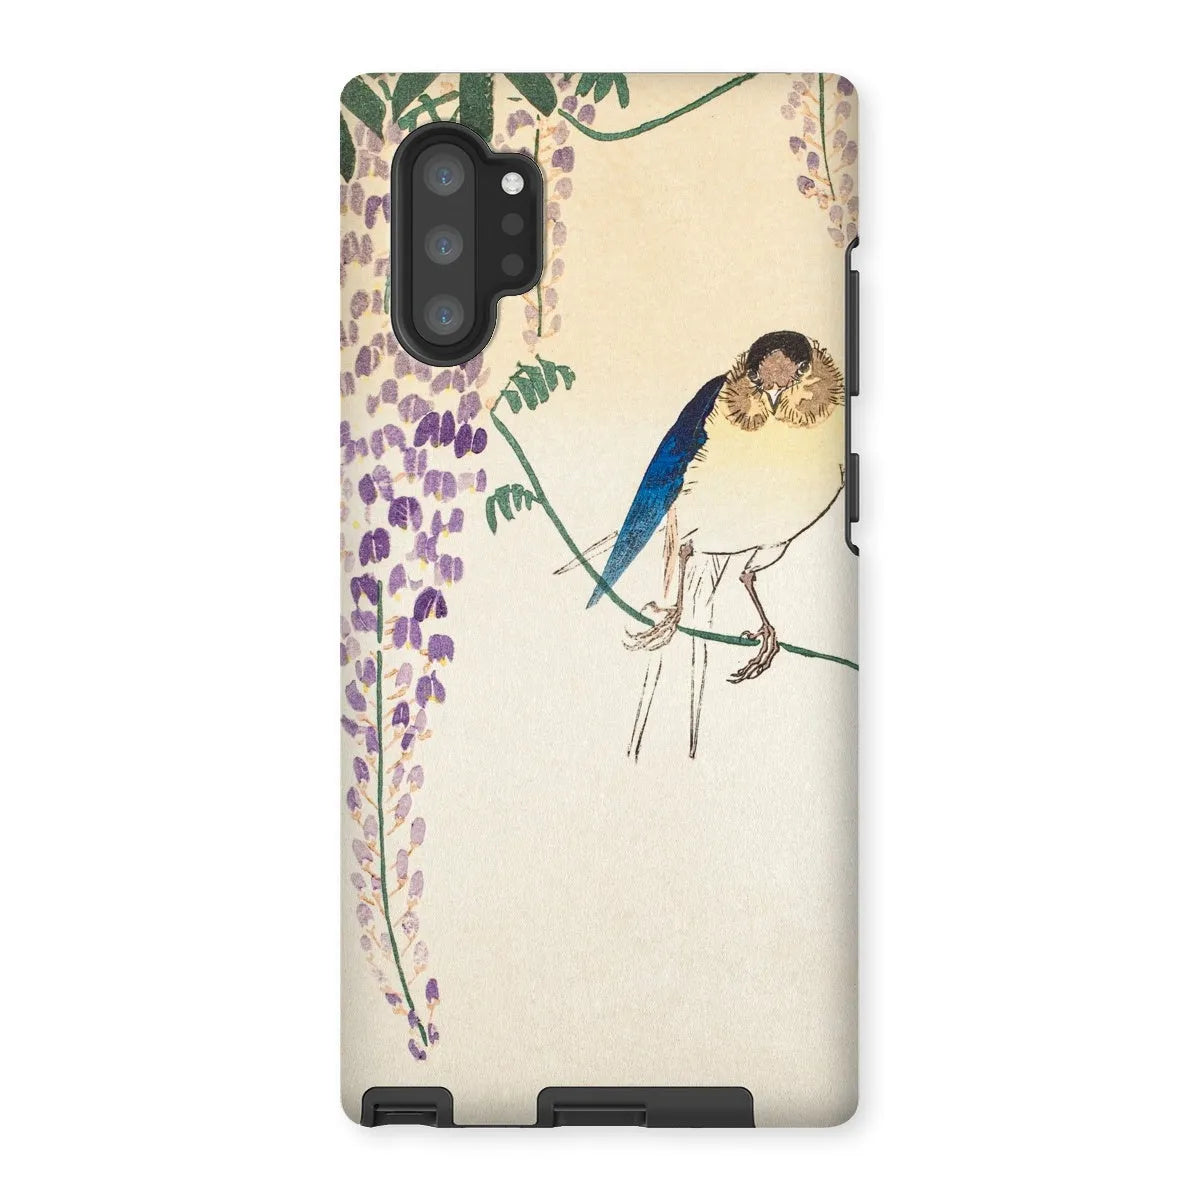 Wisteria And Swallow - Japanese Art Phone Case - Ohara Koson - Samsung Galaxy Note 10p / Matte - Mobile Phone Cases